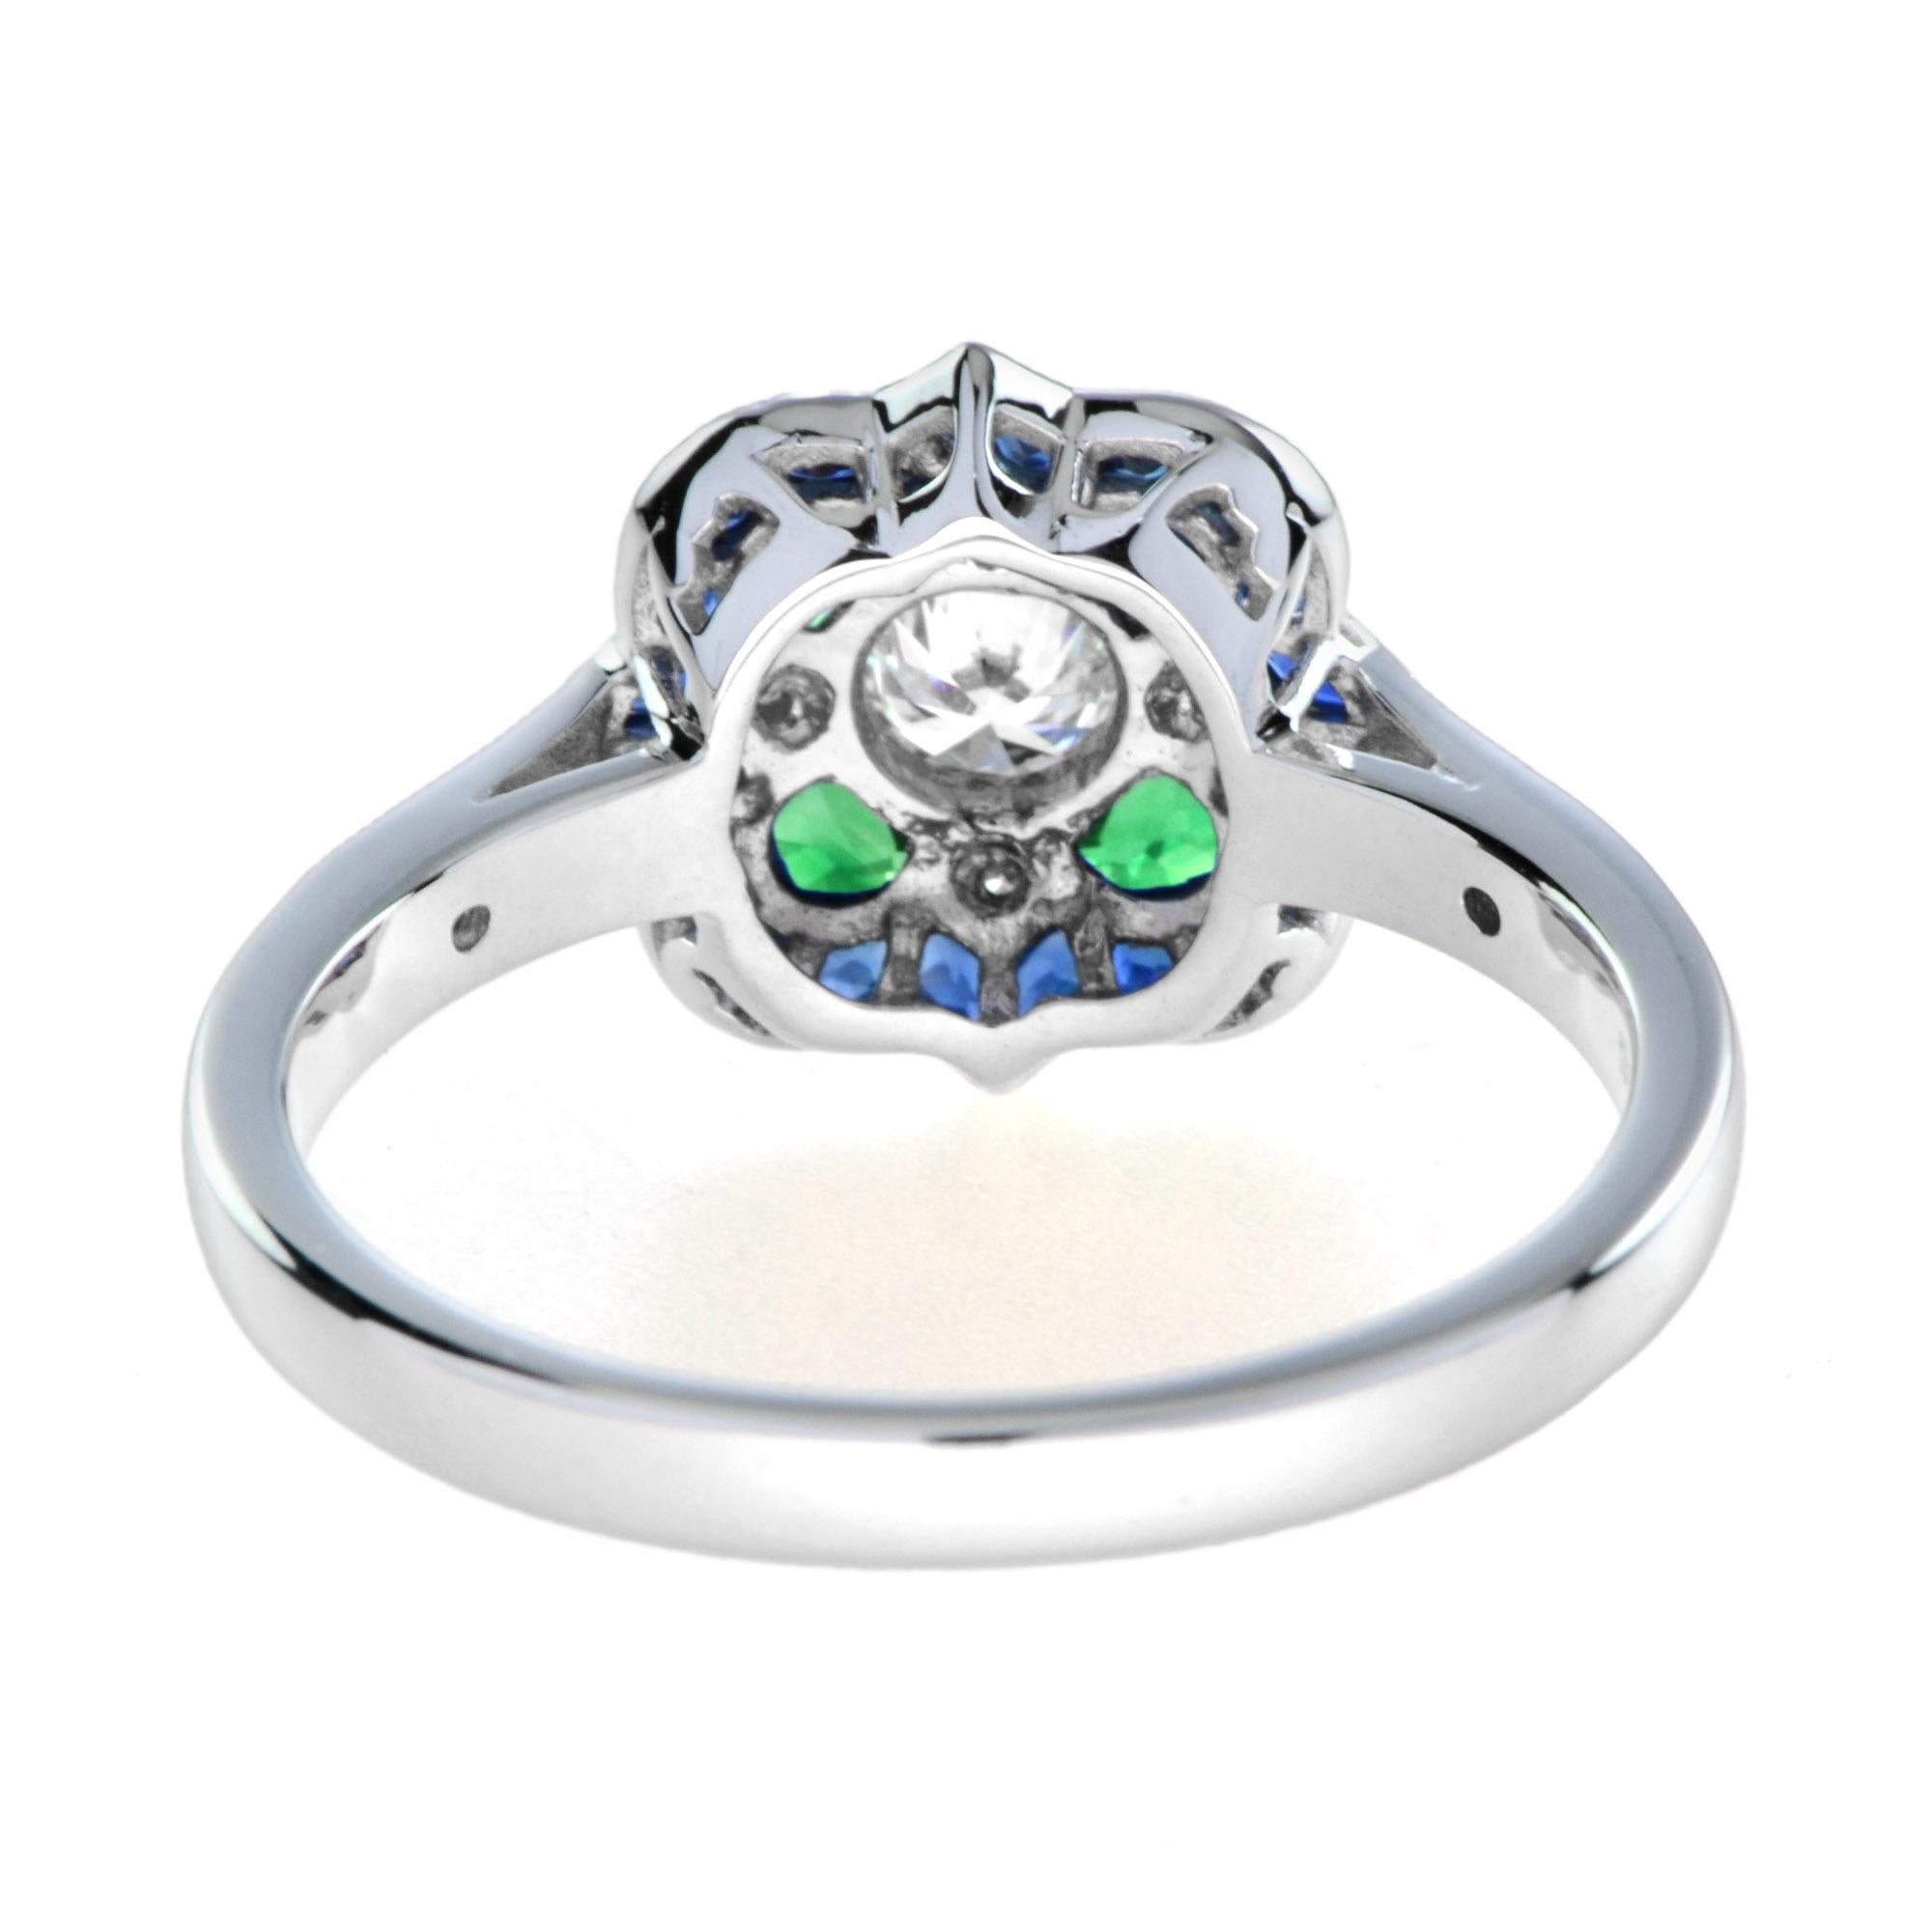 For Sale:  Art Deco Style Diamond with Emerald and Sapphire Ring in 18K White Gold 5